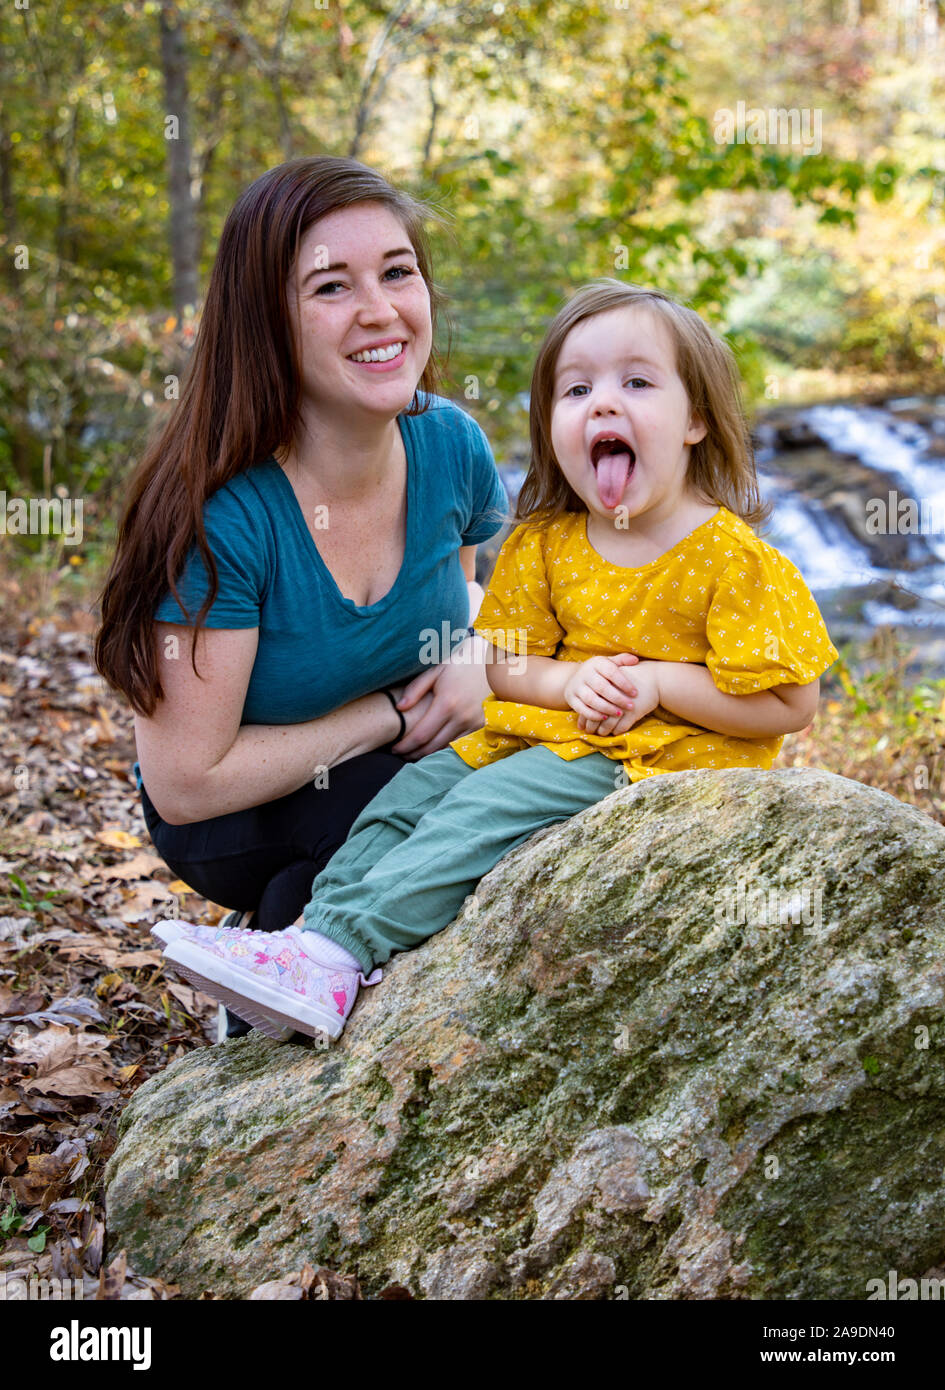 daughter sticking out tongue while mother laughs Stock Photo